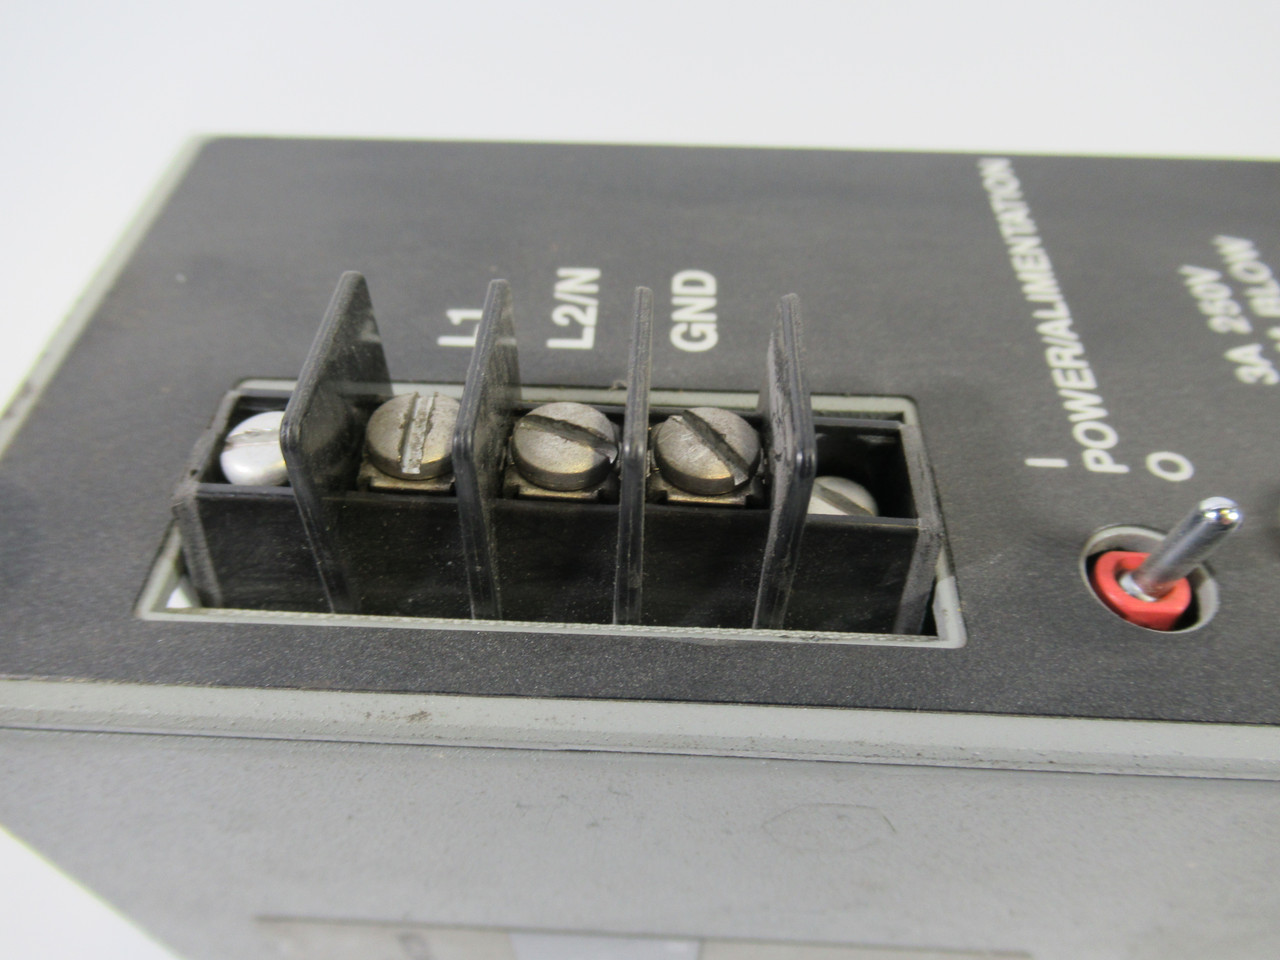 Allen-Bradley 1771-P7 AC Power Supply 5VDC 16A MISSING WIRE COVER & CLIP USED